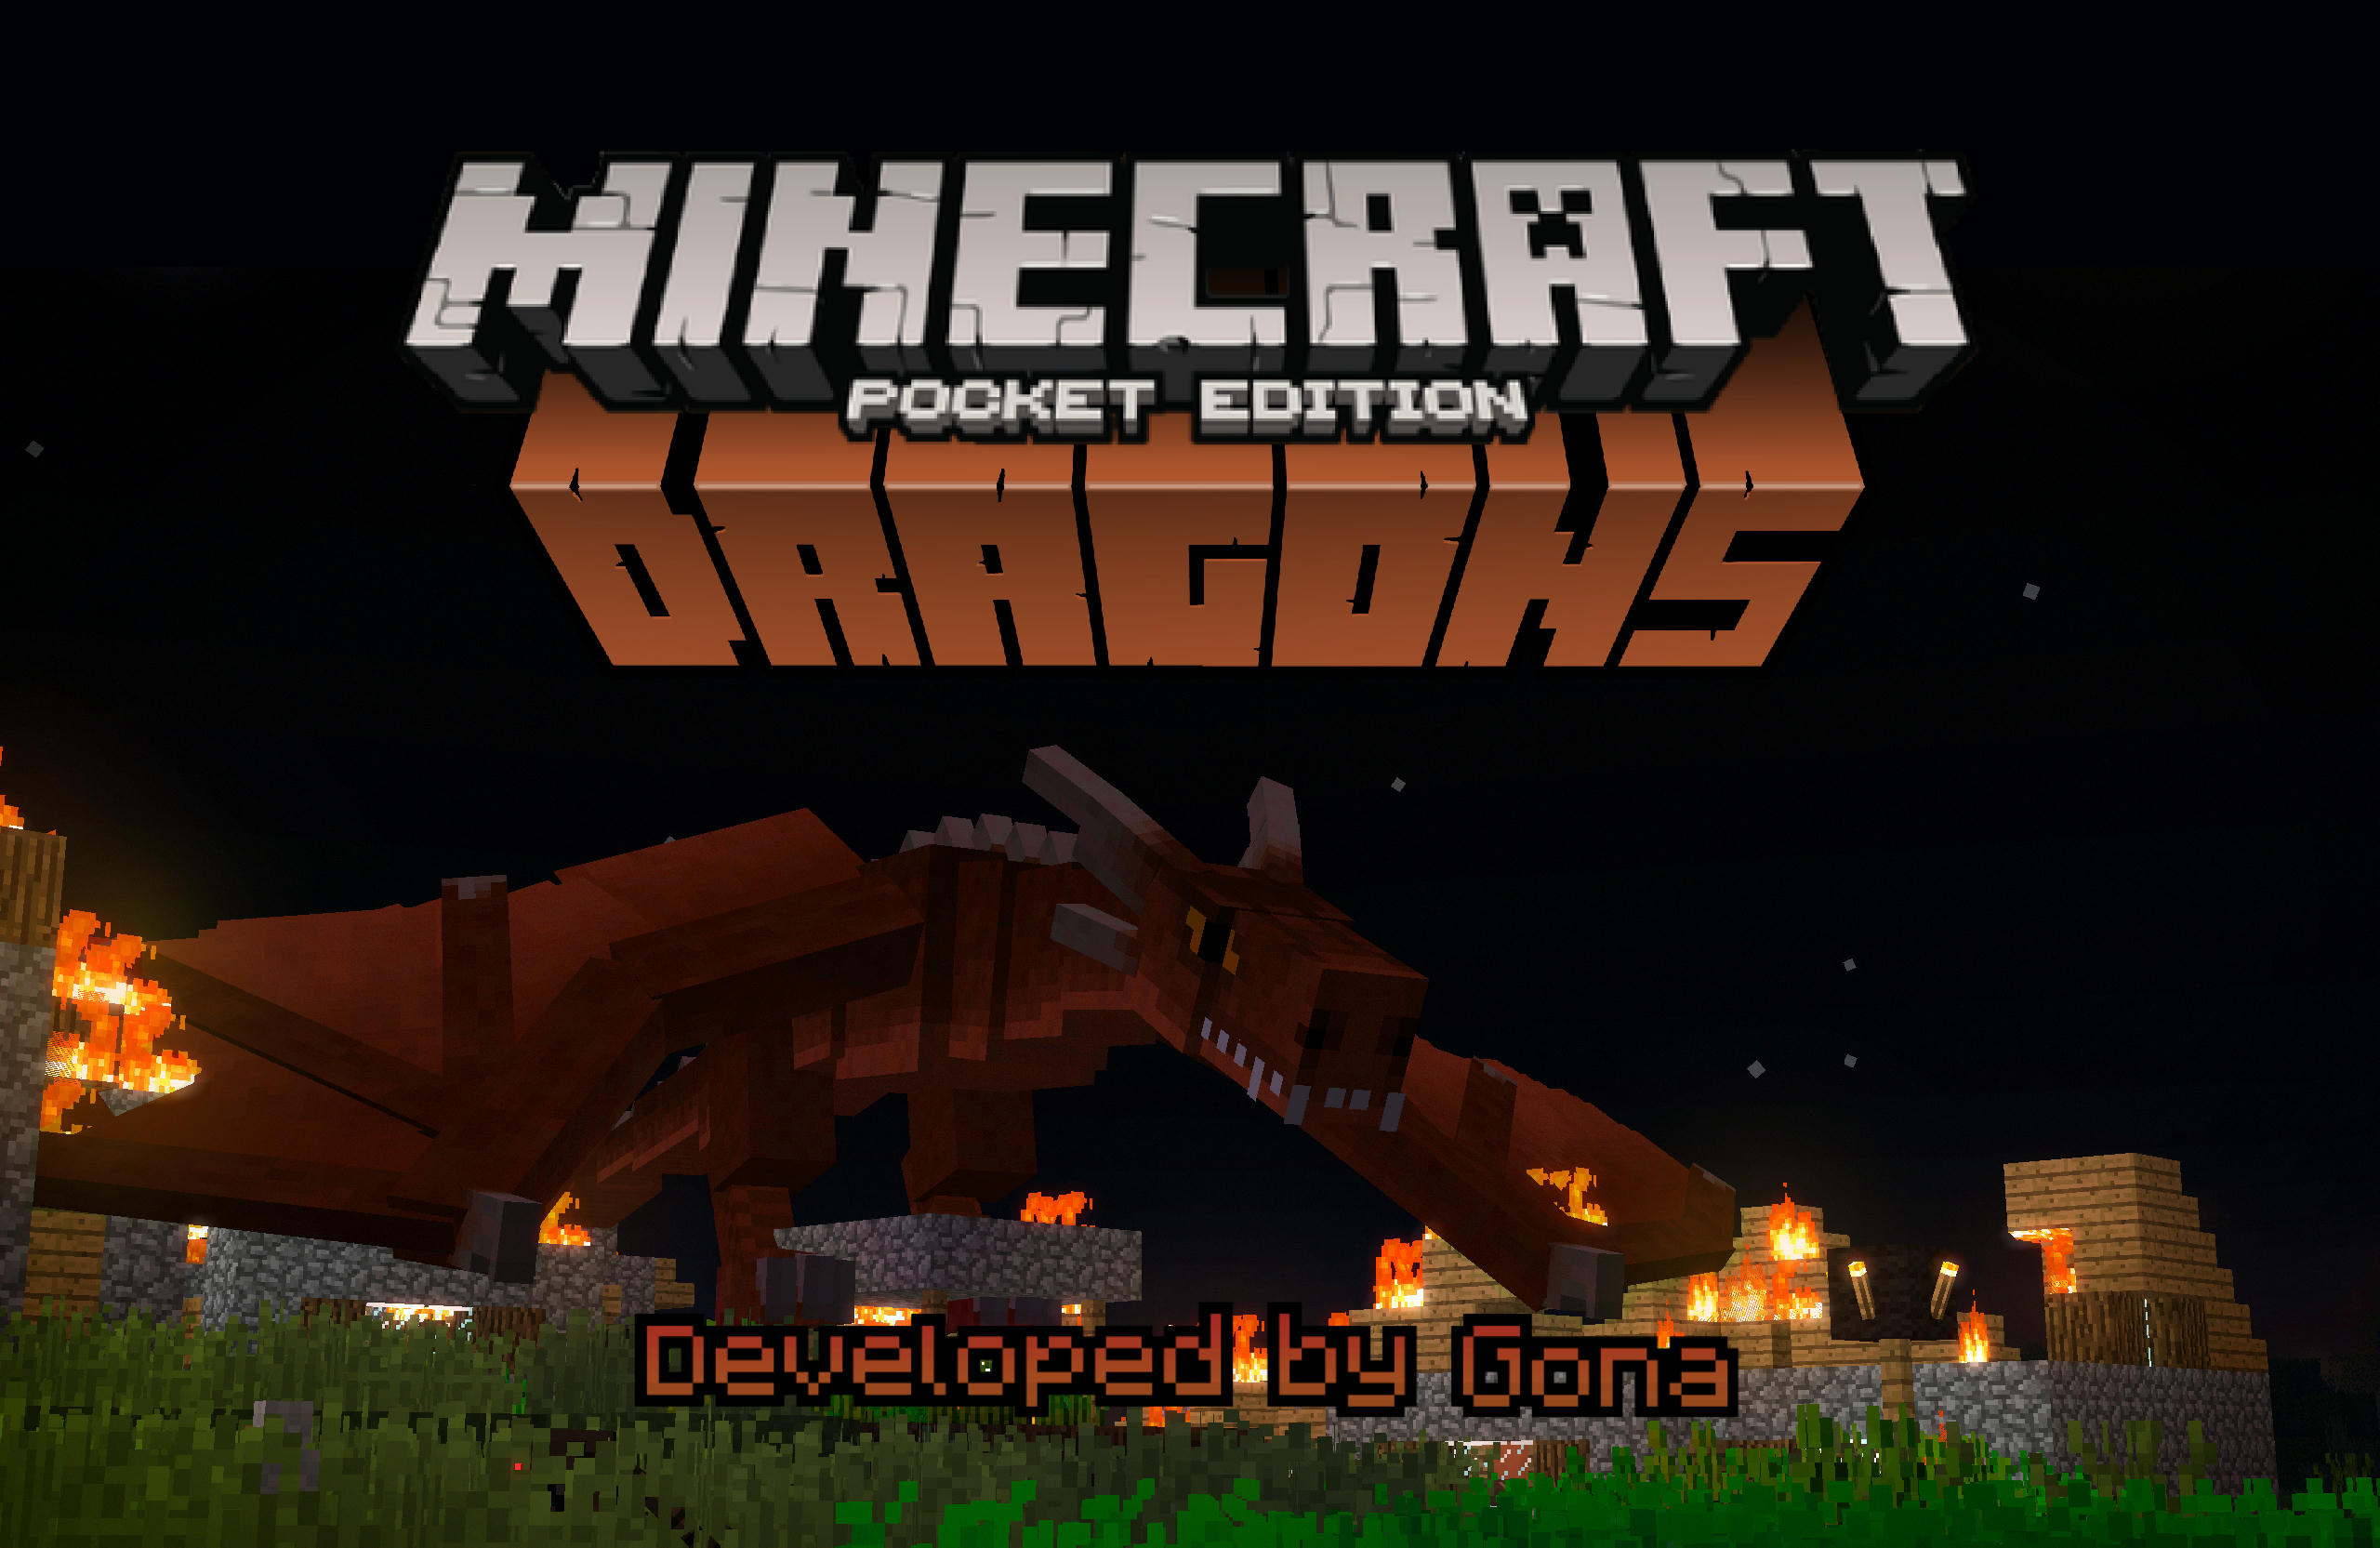 Dragons Add On Train Your Own Dragon Android Ios Win10 Mcpe Mods Tools Minecraft Pocket Edition Minecraft Forum Minecraft Forum